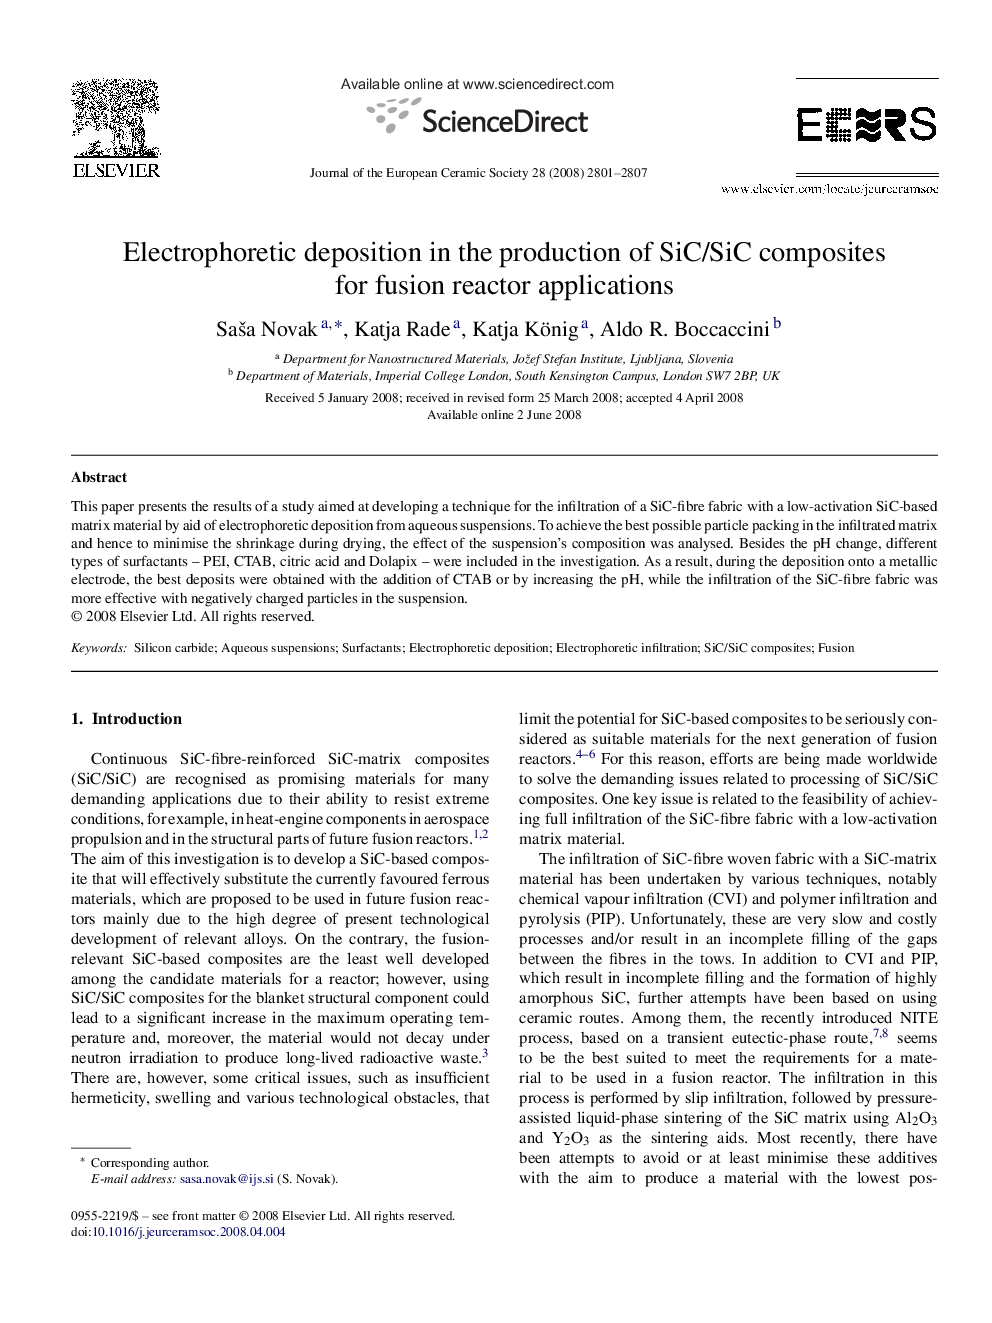 Electrophoretic deposition in the production of SiC/SiC composites for fusion reactor applications